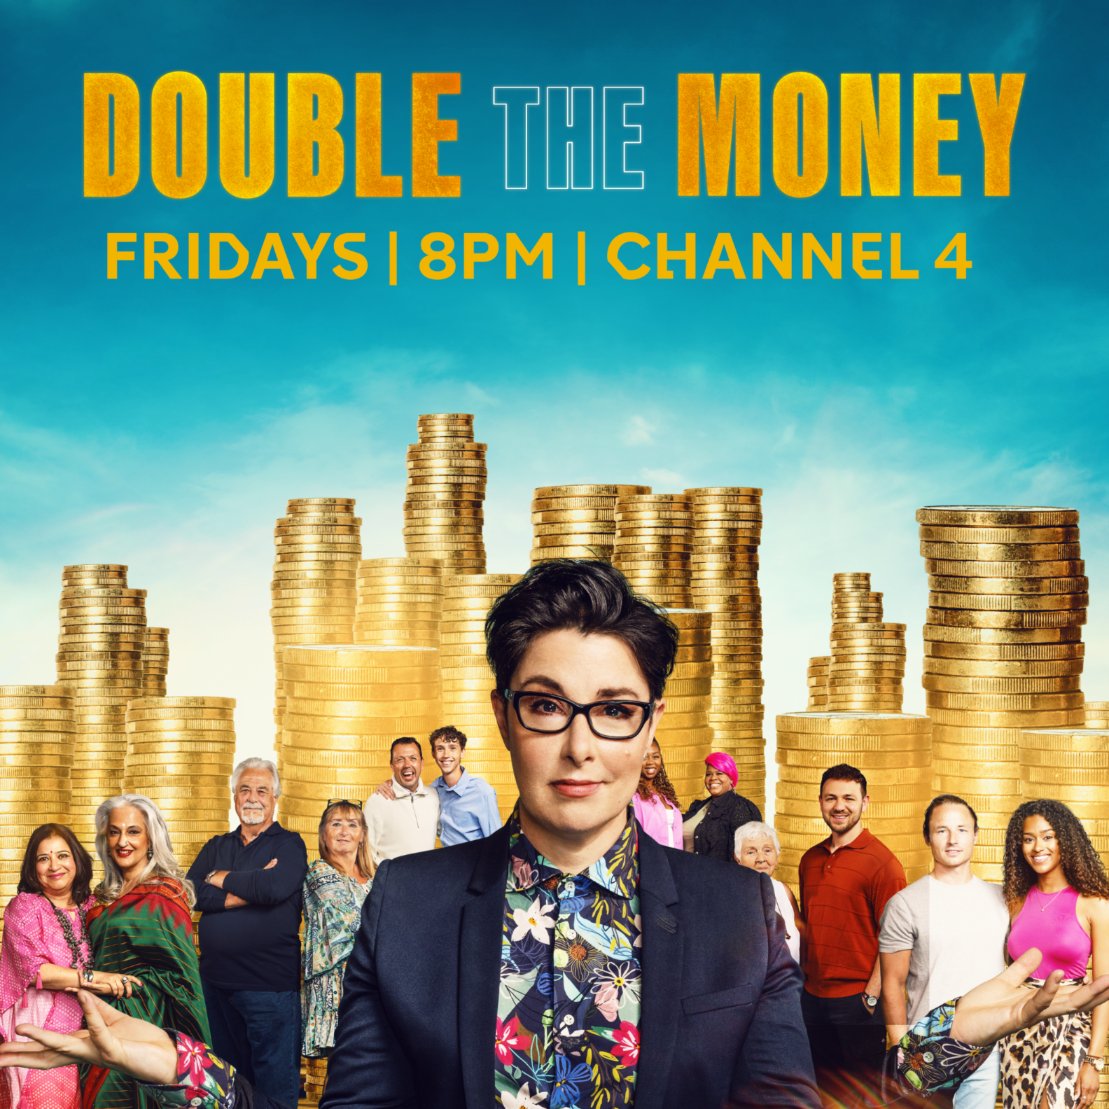 We know you’re loving #DoubleTheMoney so set your alarms for Fridays at 8 PM on @Channel4 ⏰ 

Produced by @South_Shore_UK, part of ITV Studios.